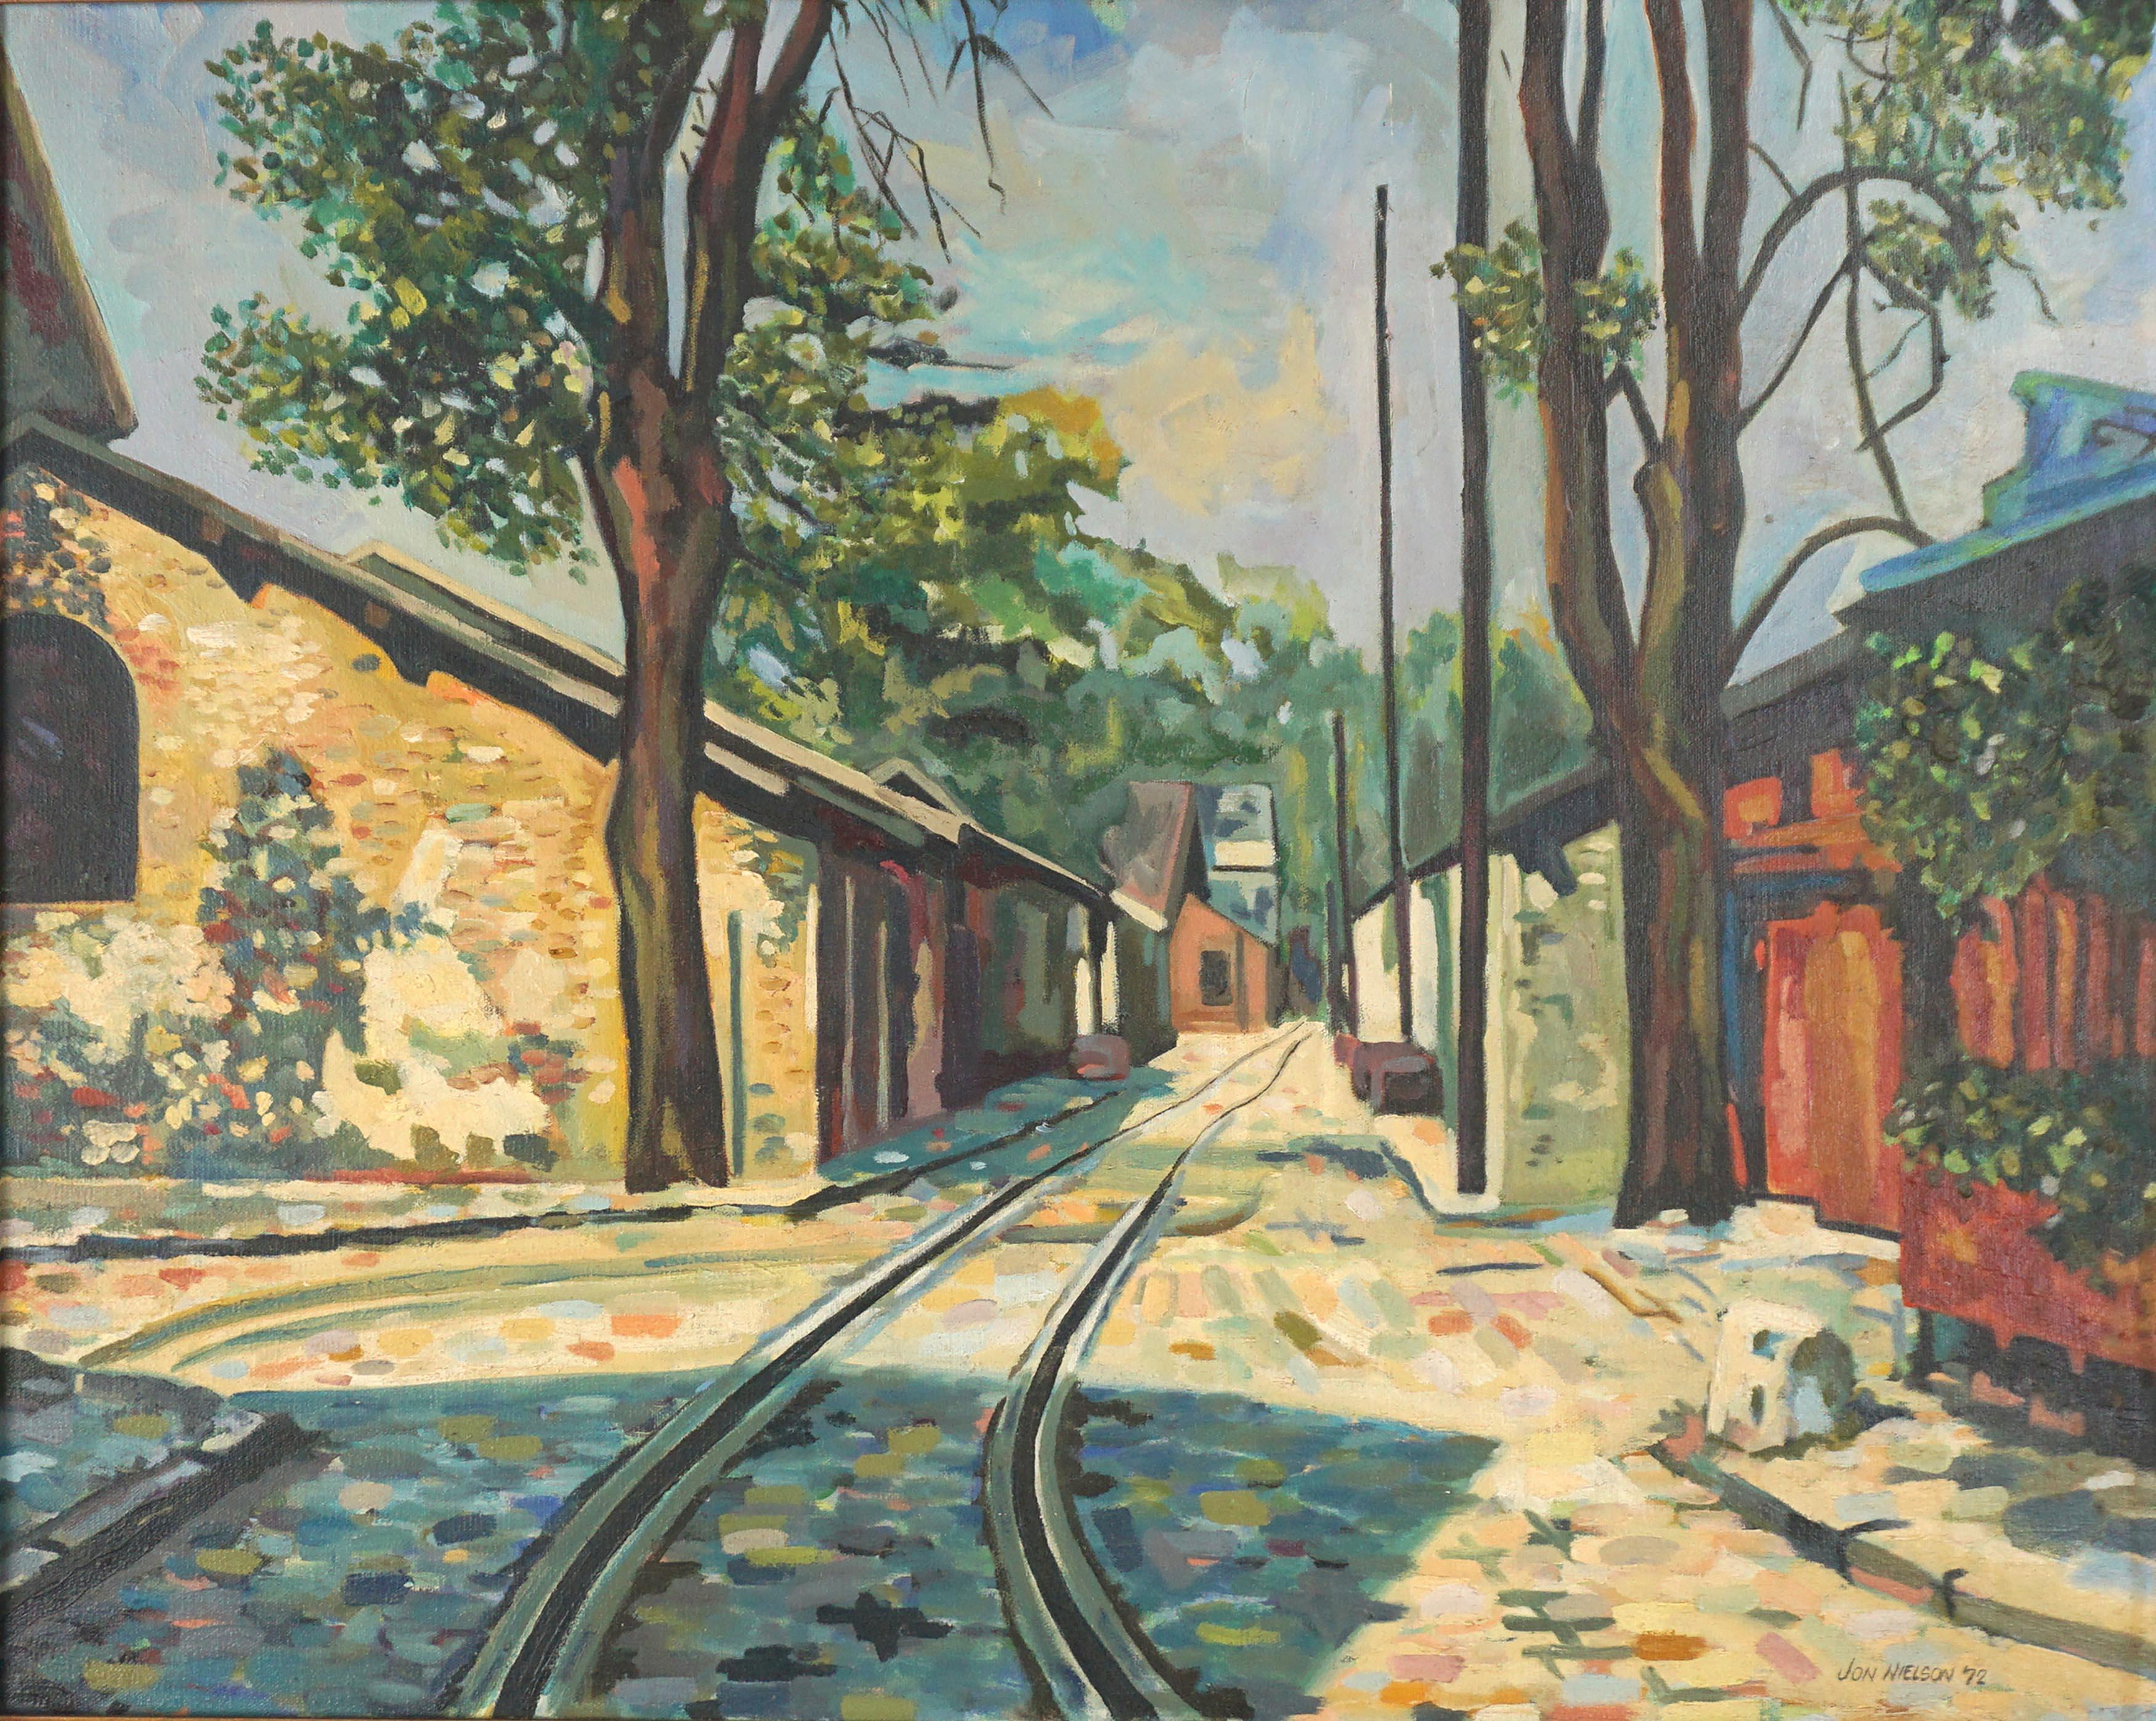 Vintage Small Town Street with Railroad Tracks Landscape - Painting by Jon Nielson